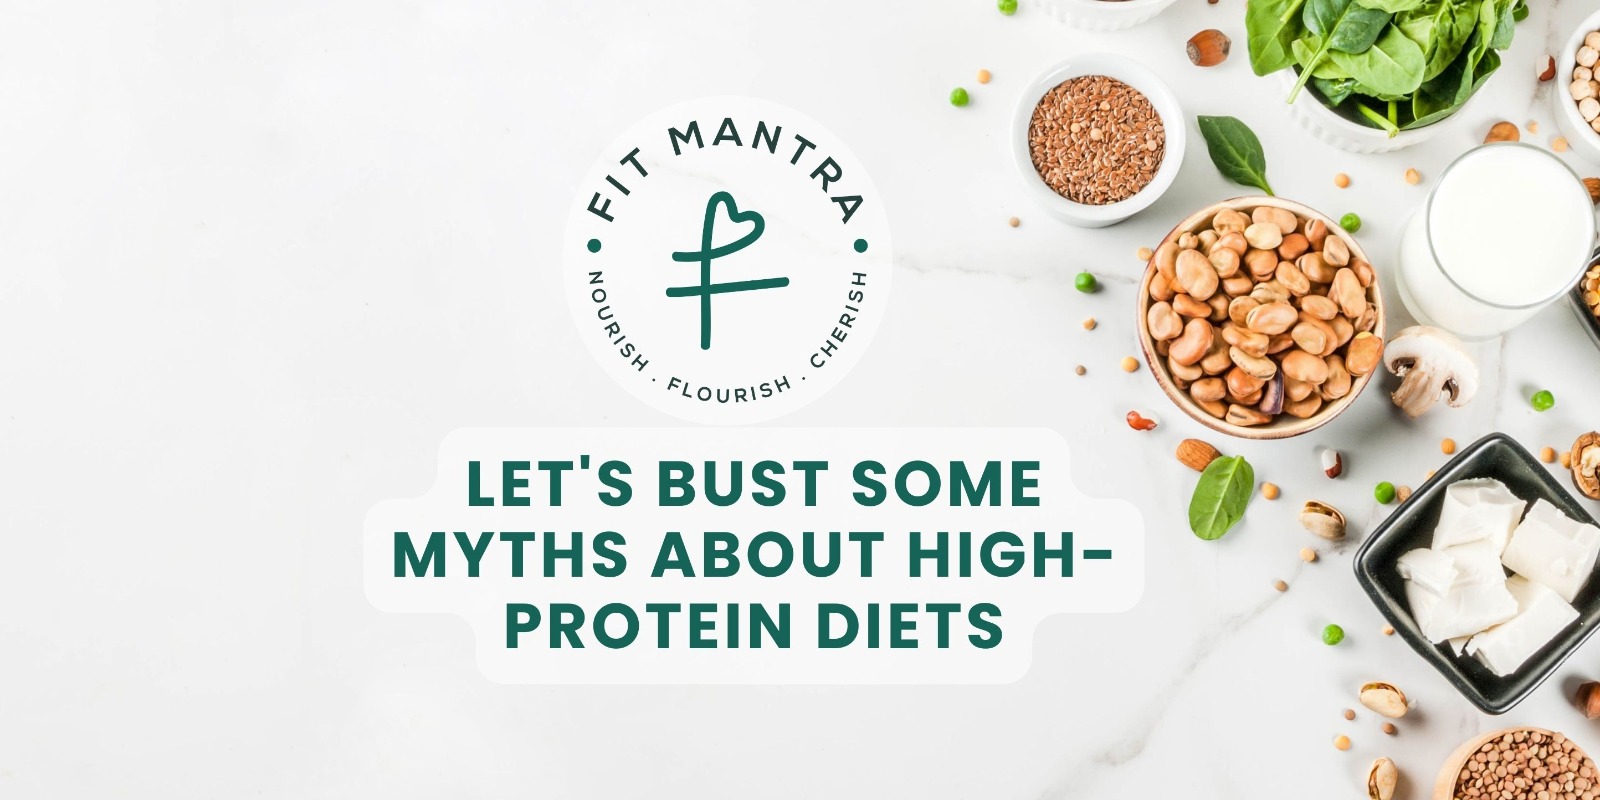 Myths and Facts about High Protein Diets